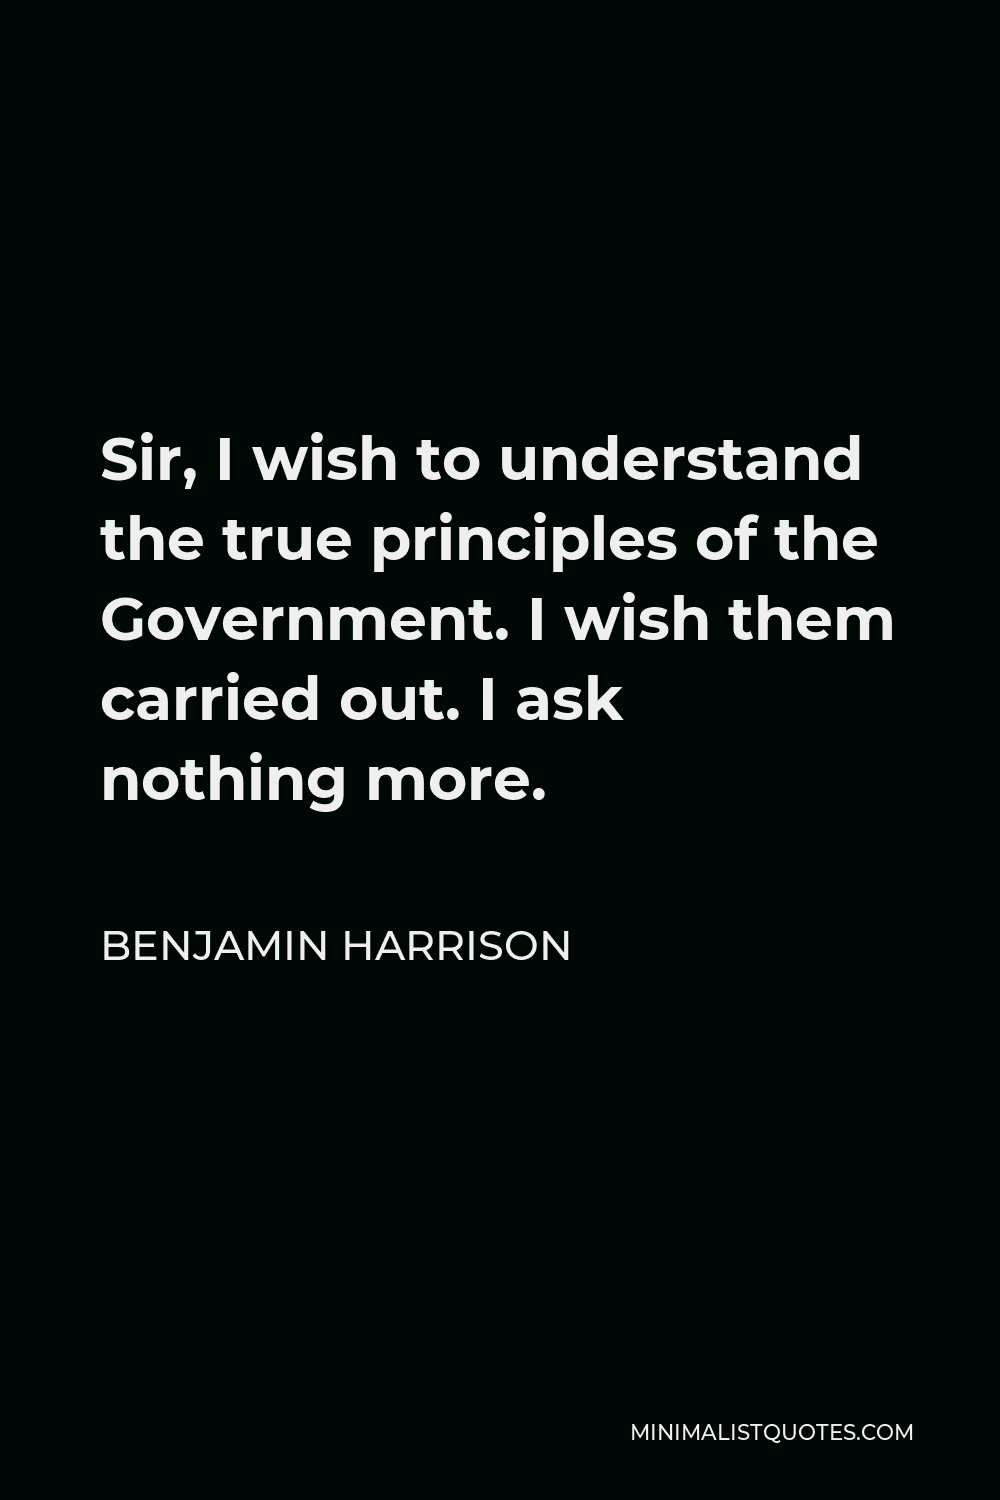 Benjamin Harrison Quote - Sir, I wish to understand the true principles of the Government. I wish them carried out. I ask nothing more.